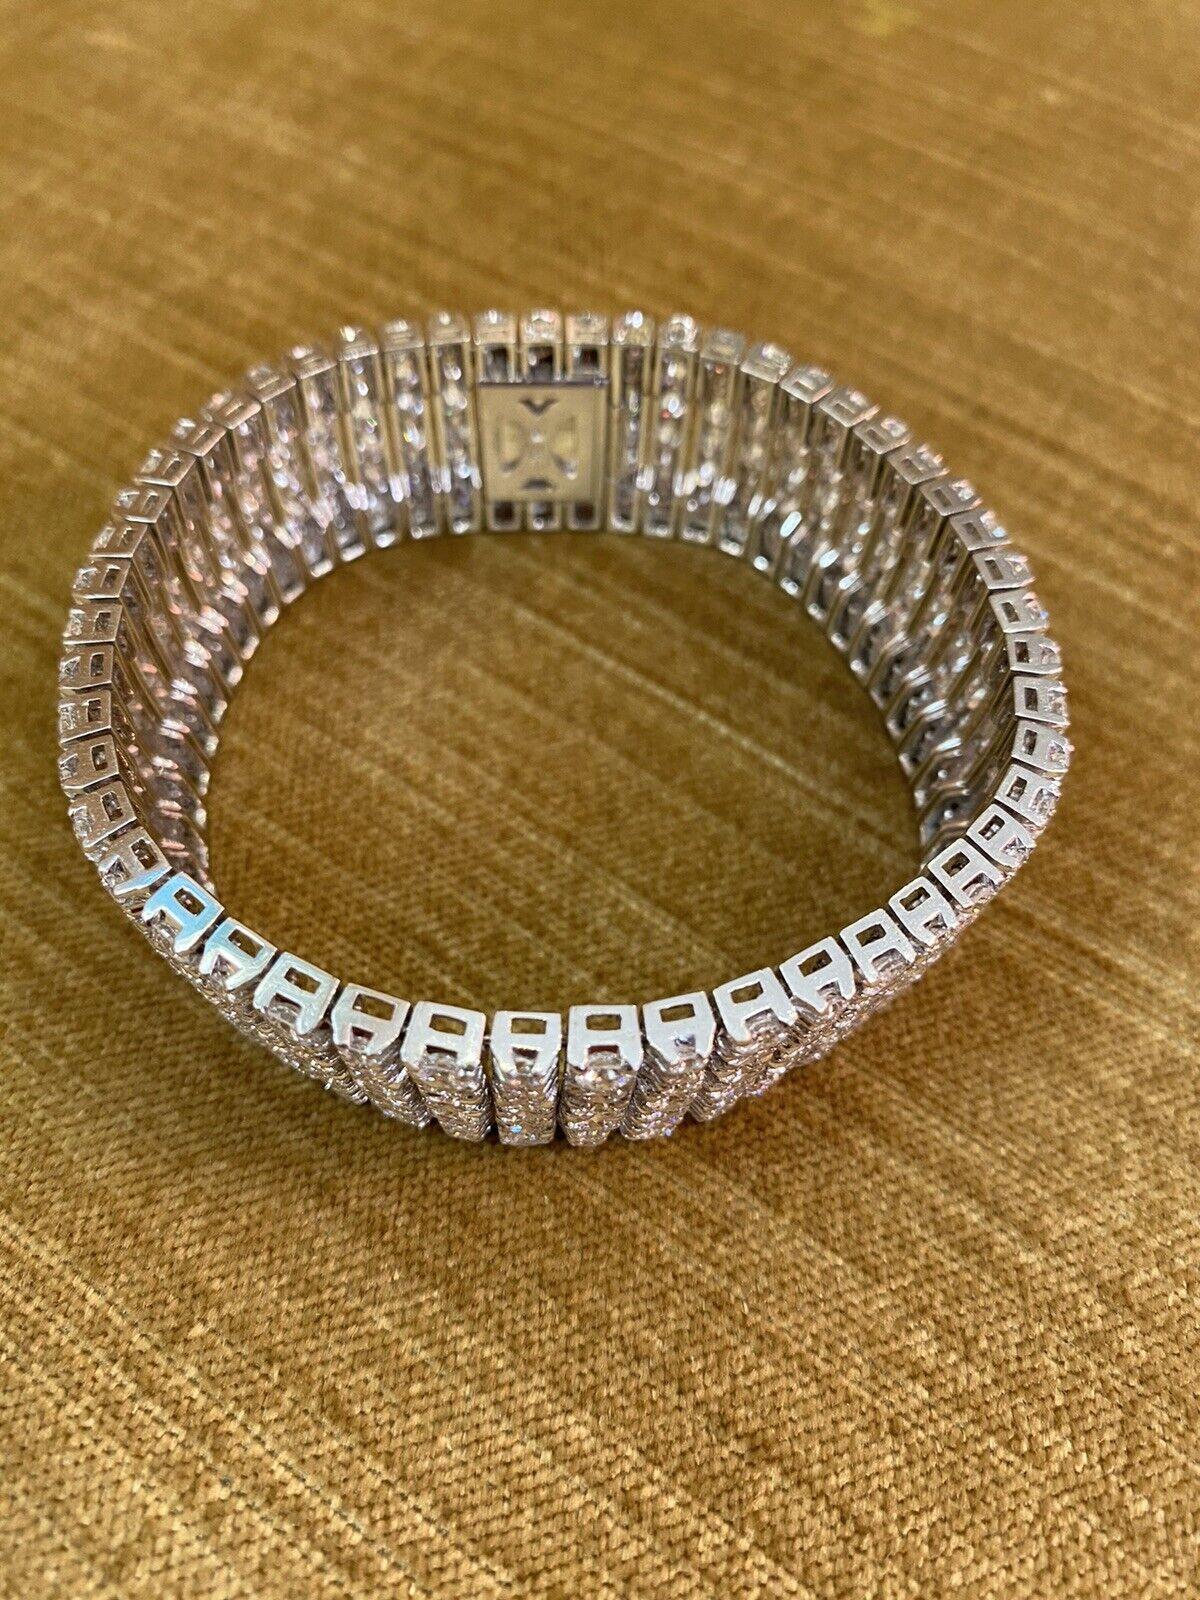 Wide Diamond Statement Bracelet in Platinum by MIKIMOTO
features
50 Rows of Round Brilliant Full cut Diamonds
4 Large/3 Small Diamonds
in alternating pattern
weighing 30.00 carats in total
Diamonds are set in Platinum

Bracelet measures .80 inch